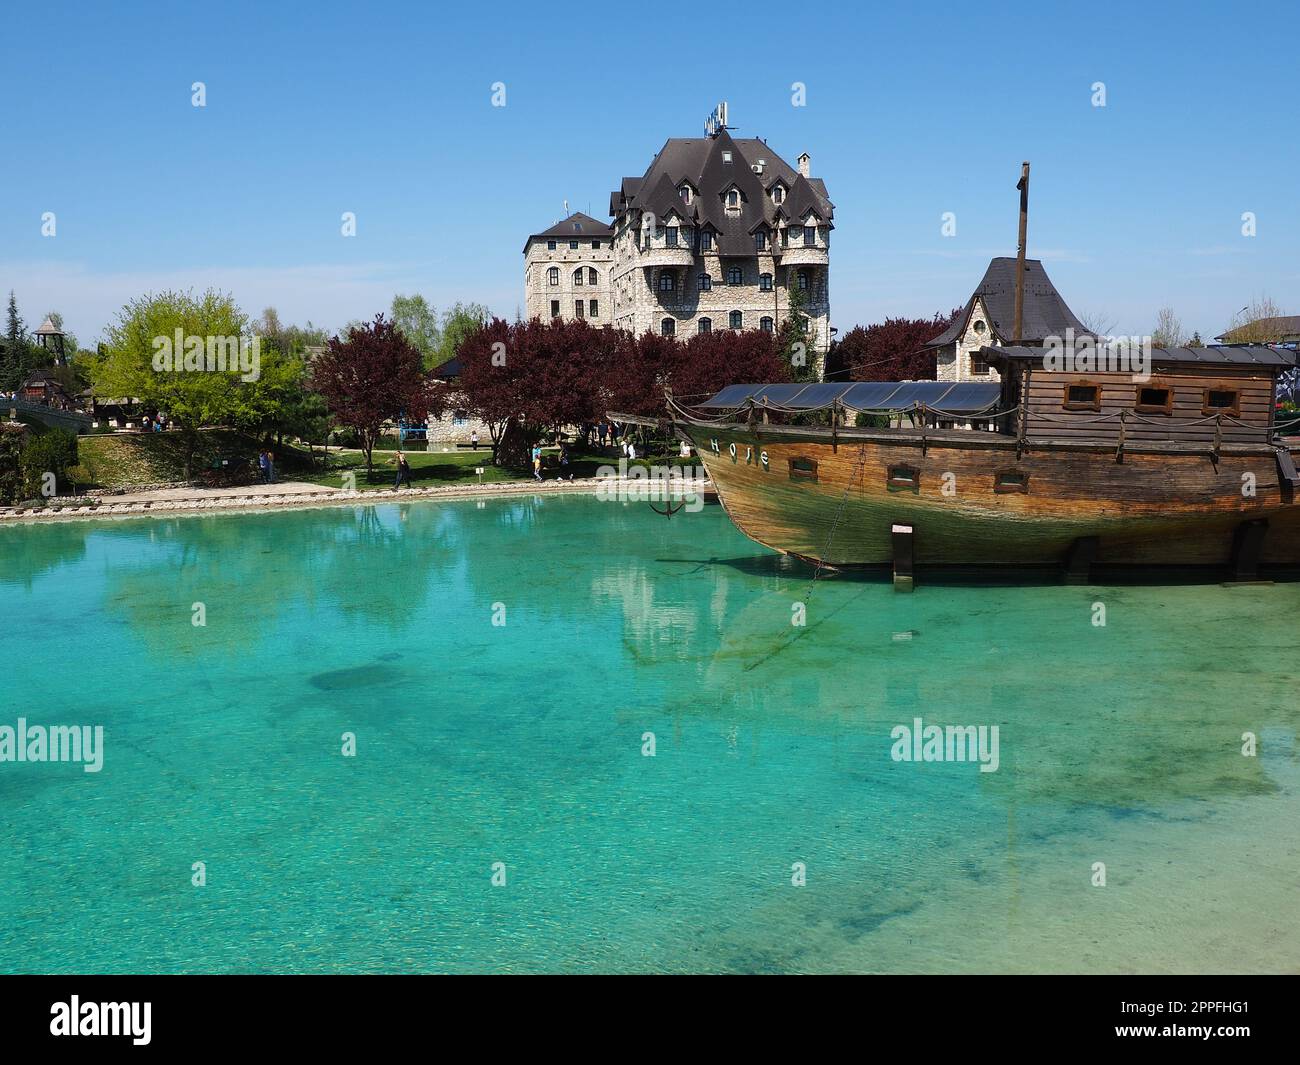 Stanisici, Bijelina, Bosnia and Herzegovina, April 25, 2021. A wooden ship with an anchor docking near the coast. Turquoise or blue water. People and tourists walk along the shore. Clear shallow water Stock Photo